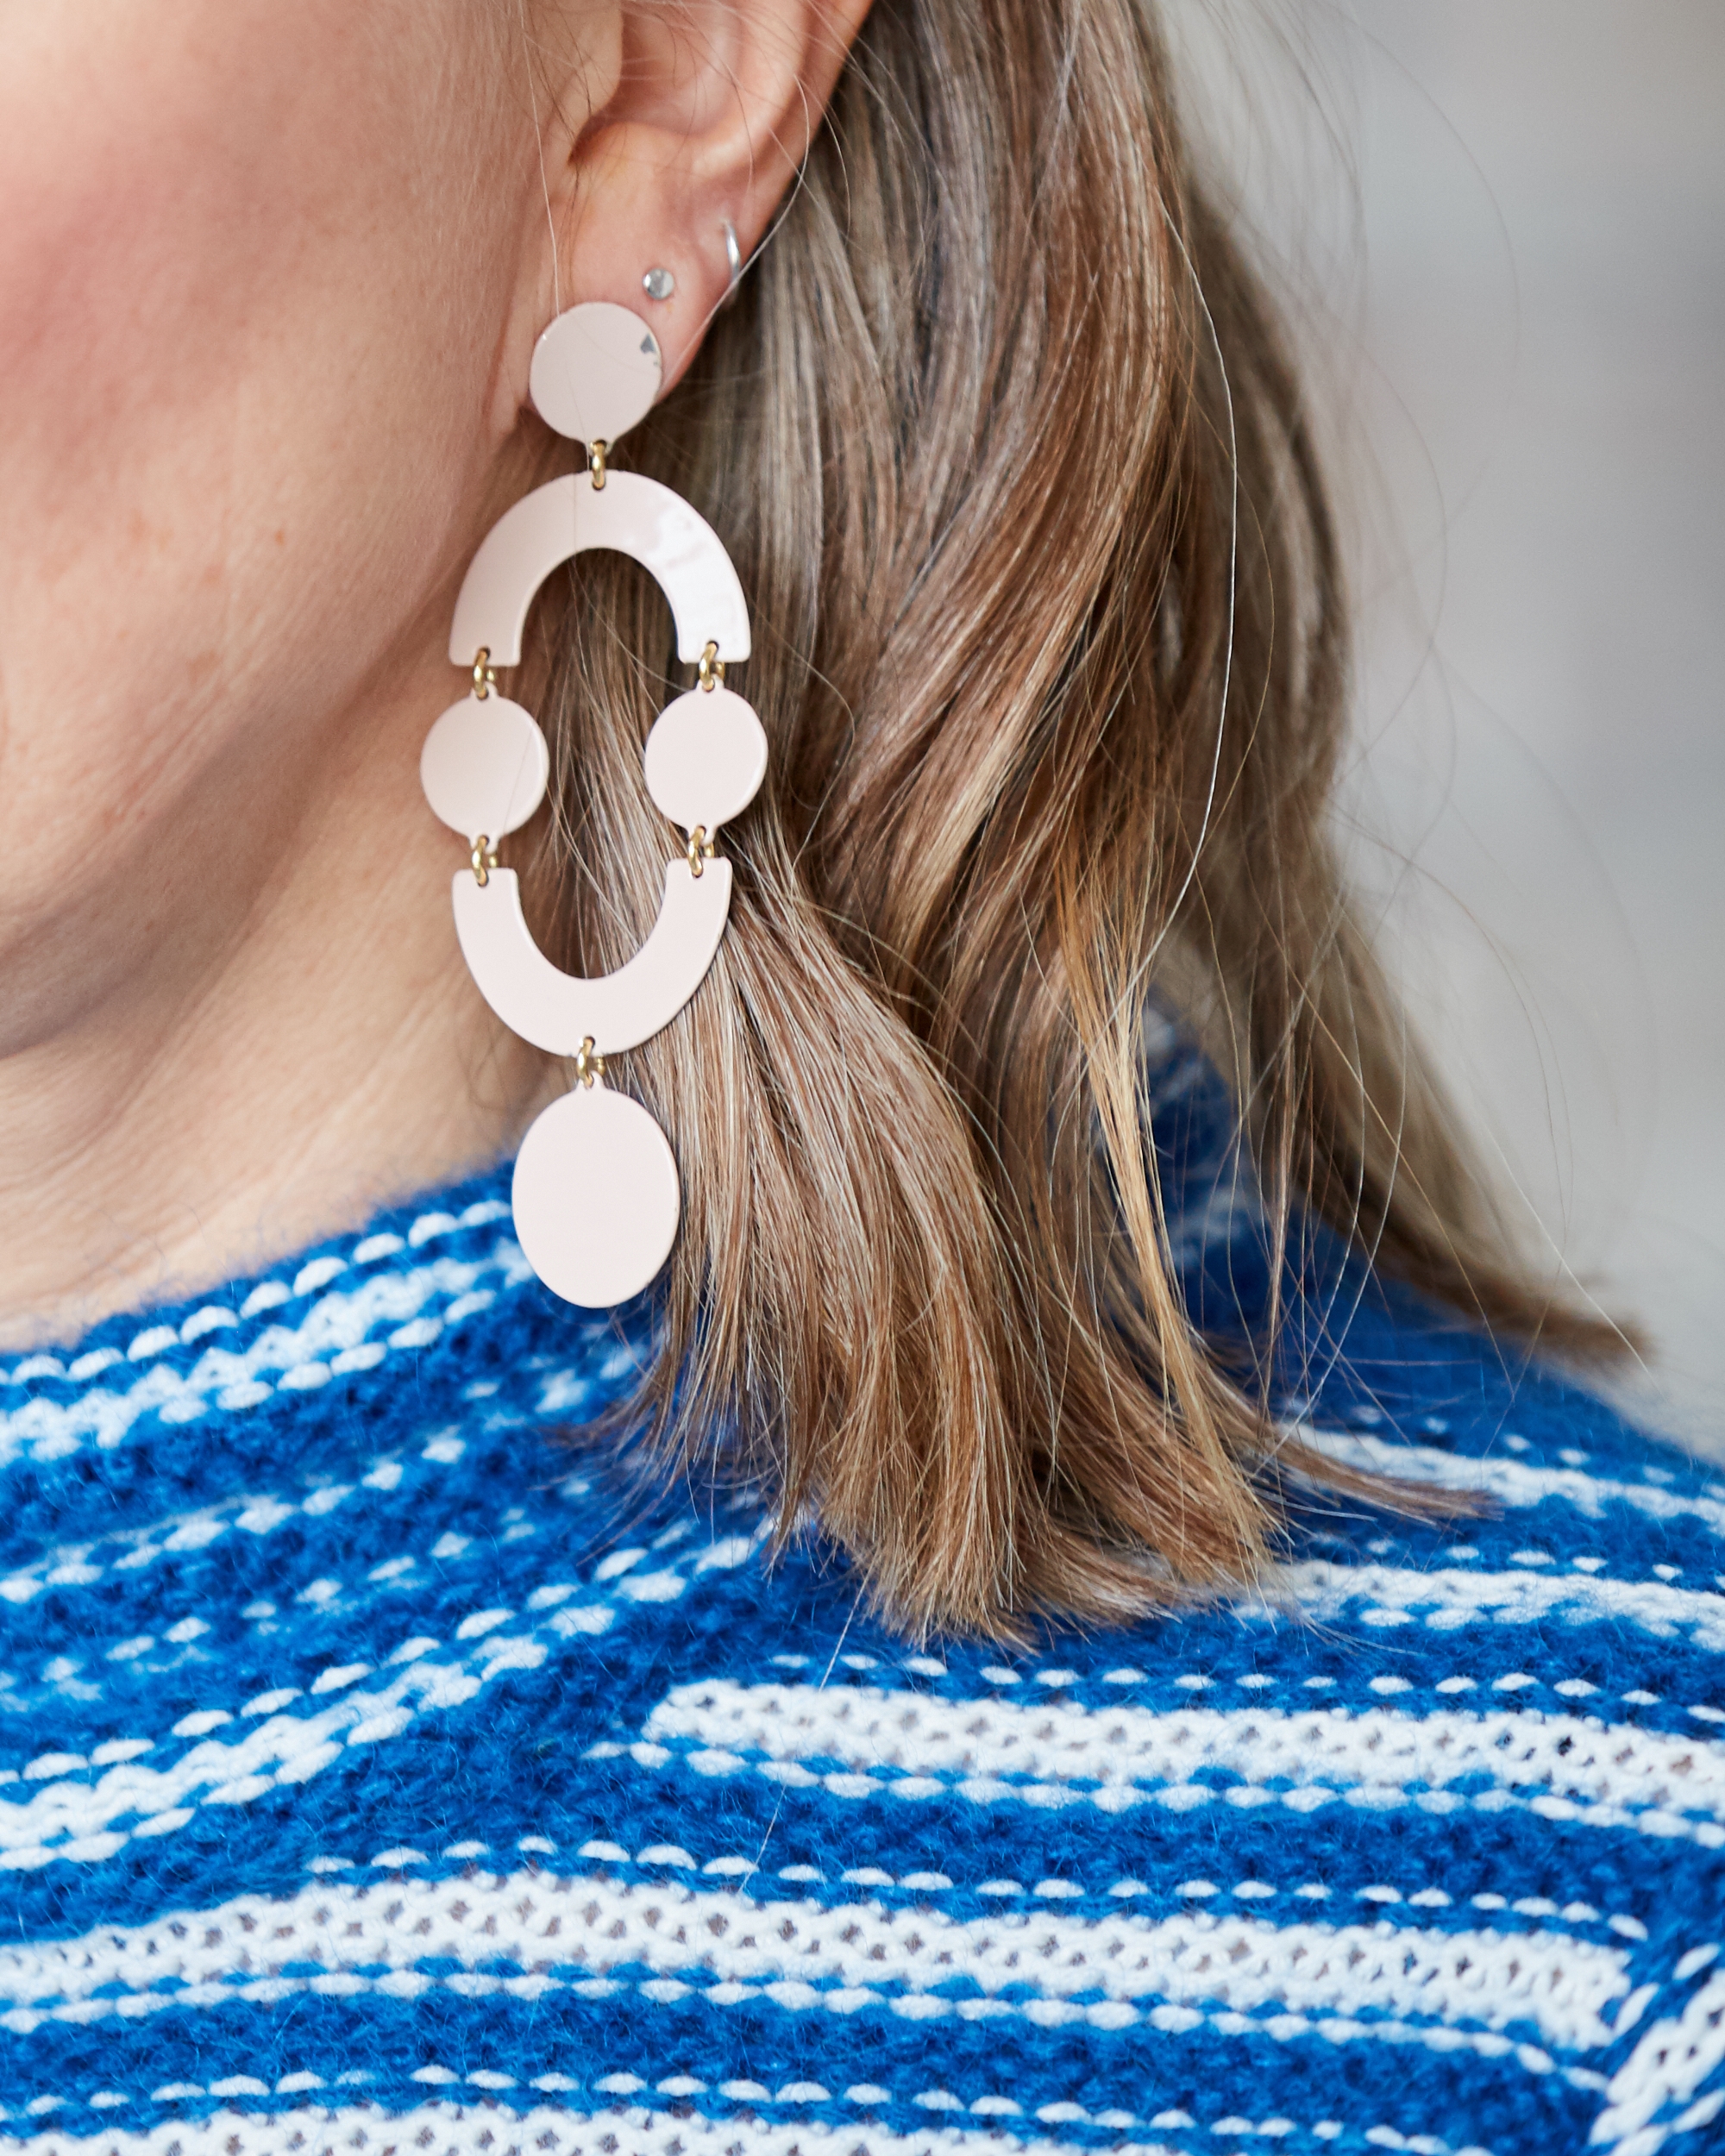 Mismatched earrings made in heaven